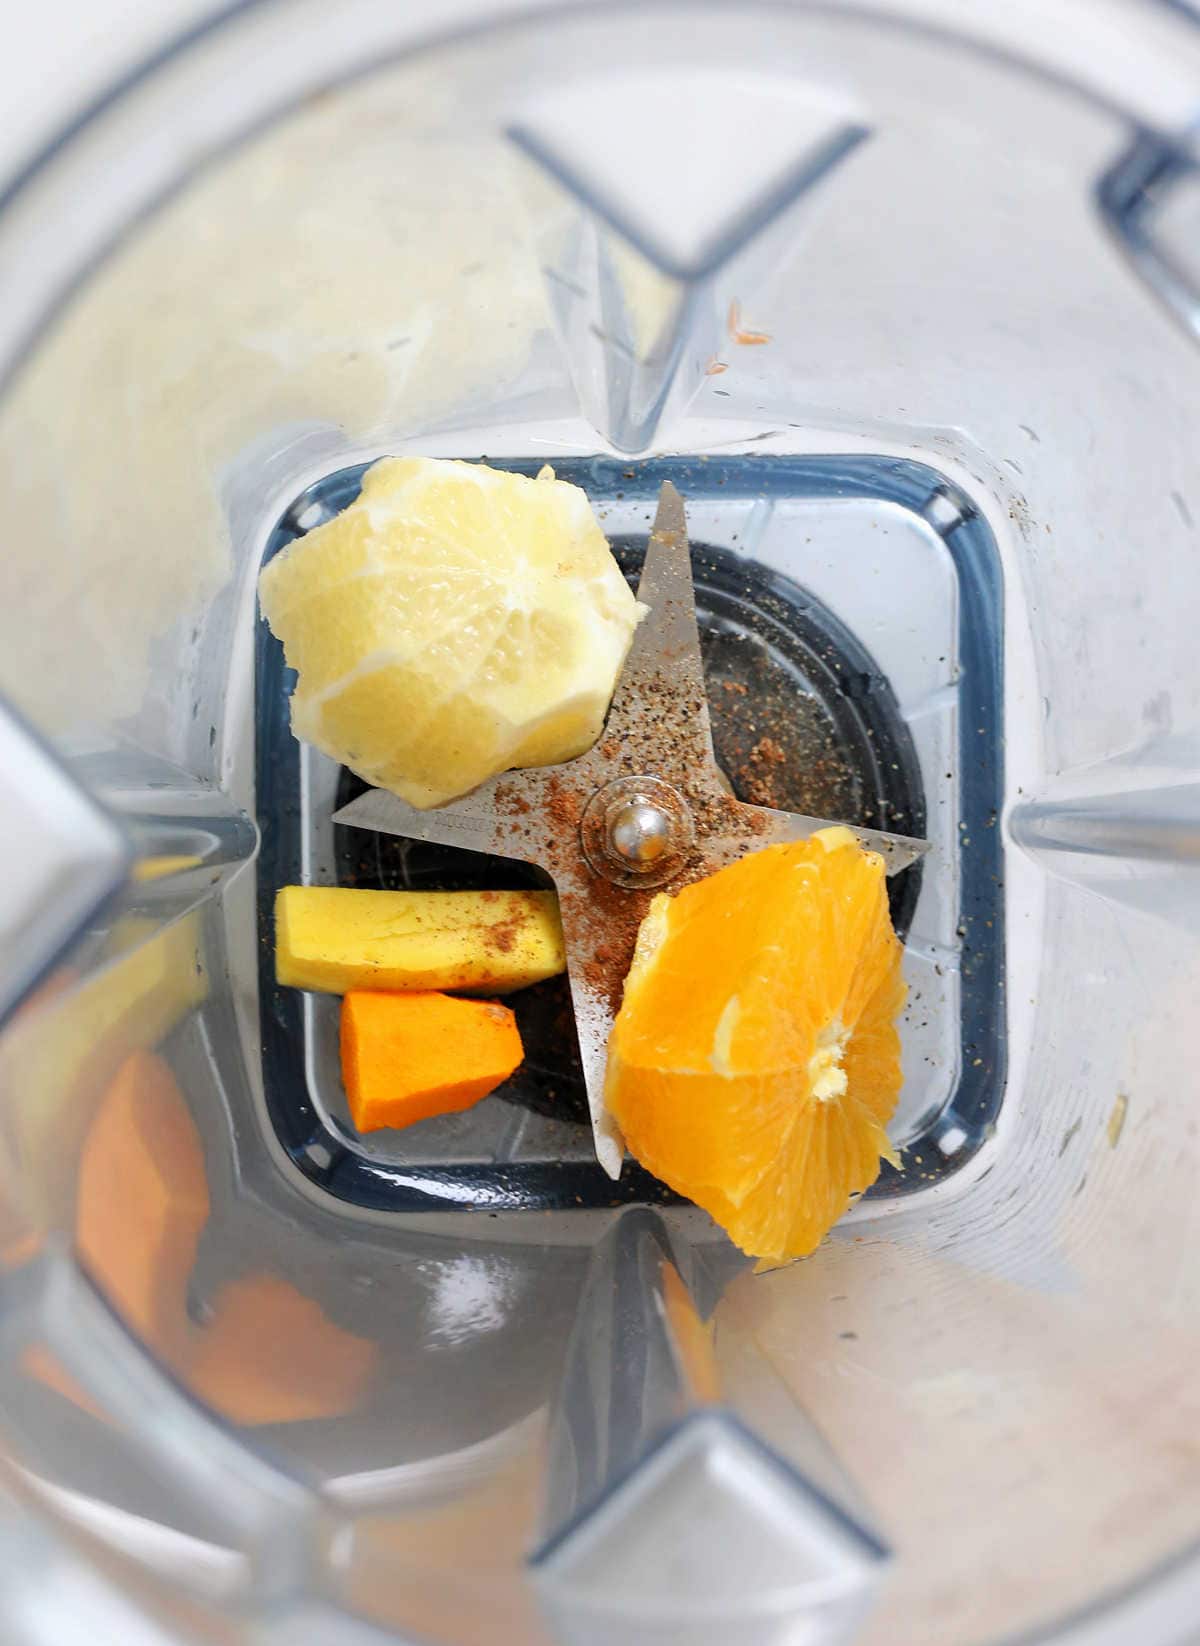 Ginger and turmeric shot ingredients in a vitamix blender.